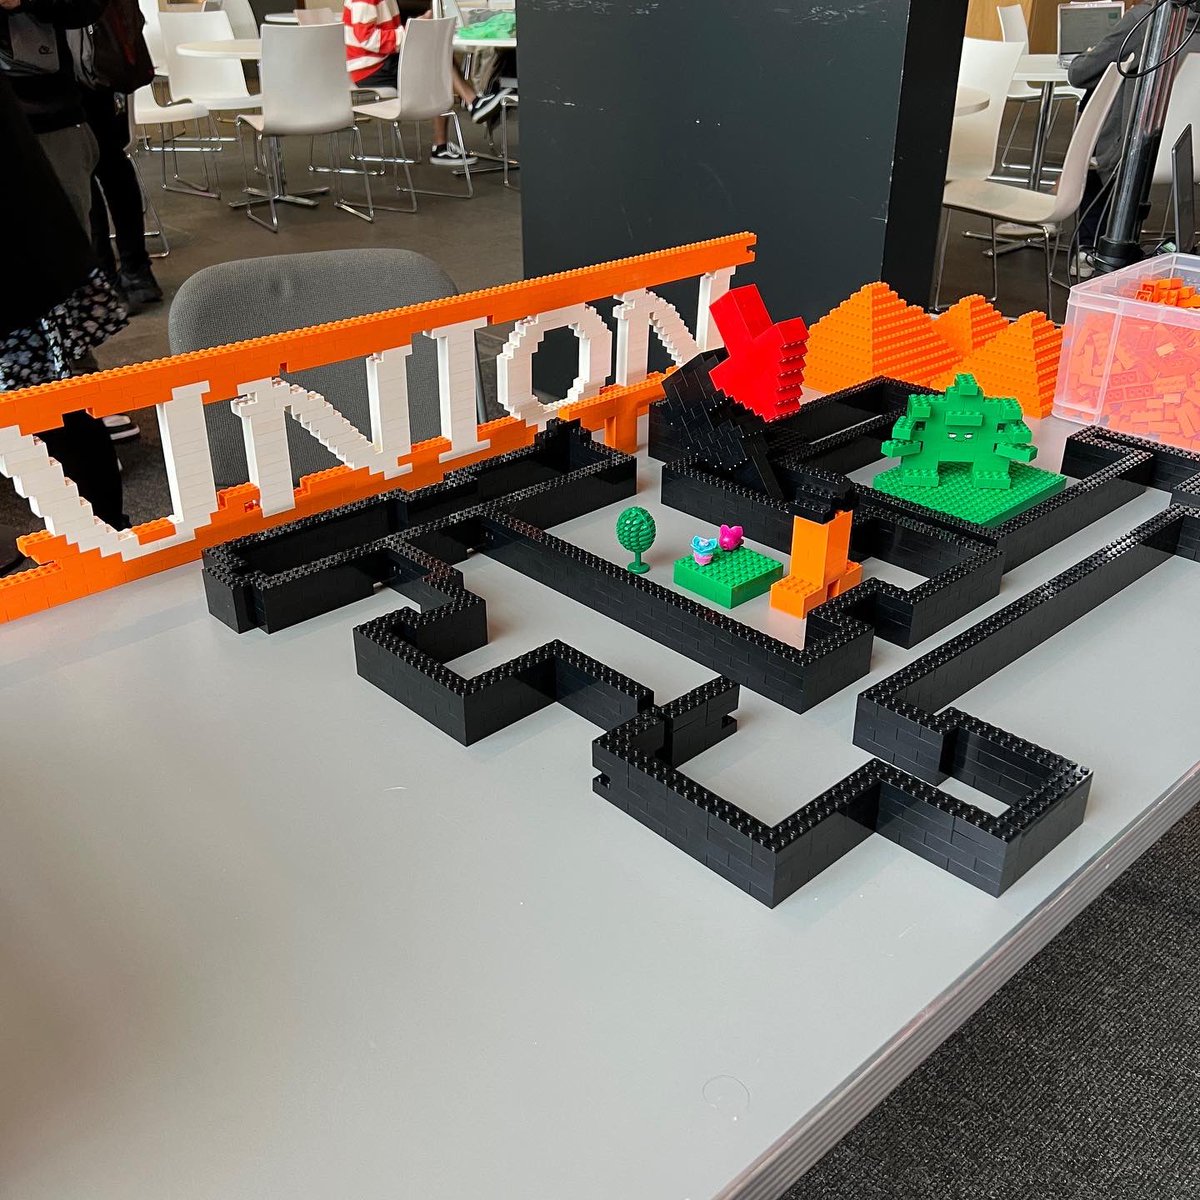 Some more photos from our @oxford_brookes University visit today for an afternoon of “stress less” LEGO brick related activities, with a nice union logo build and some very interesting looking ducks! 🤣🦆

#lego #legoevent #oxfordbrookesuniversity #stressless